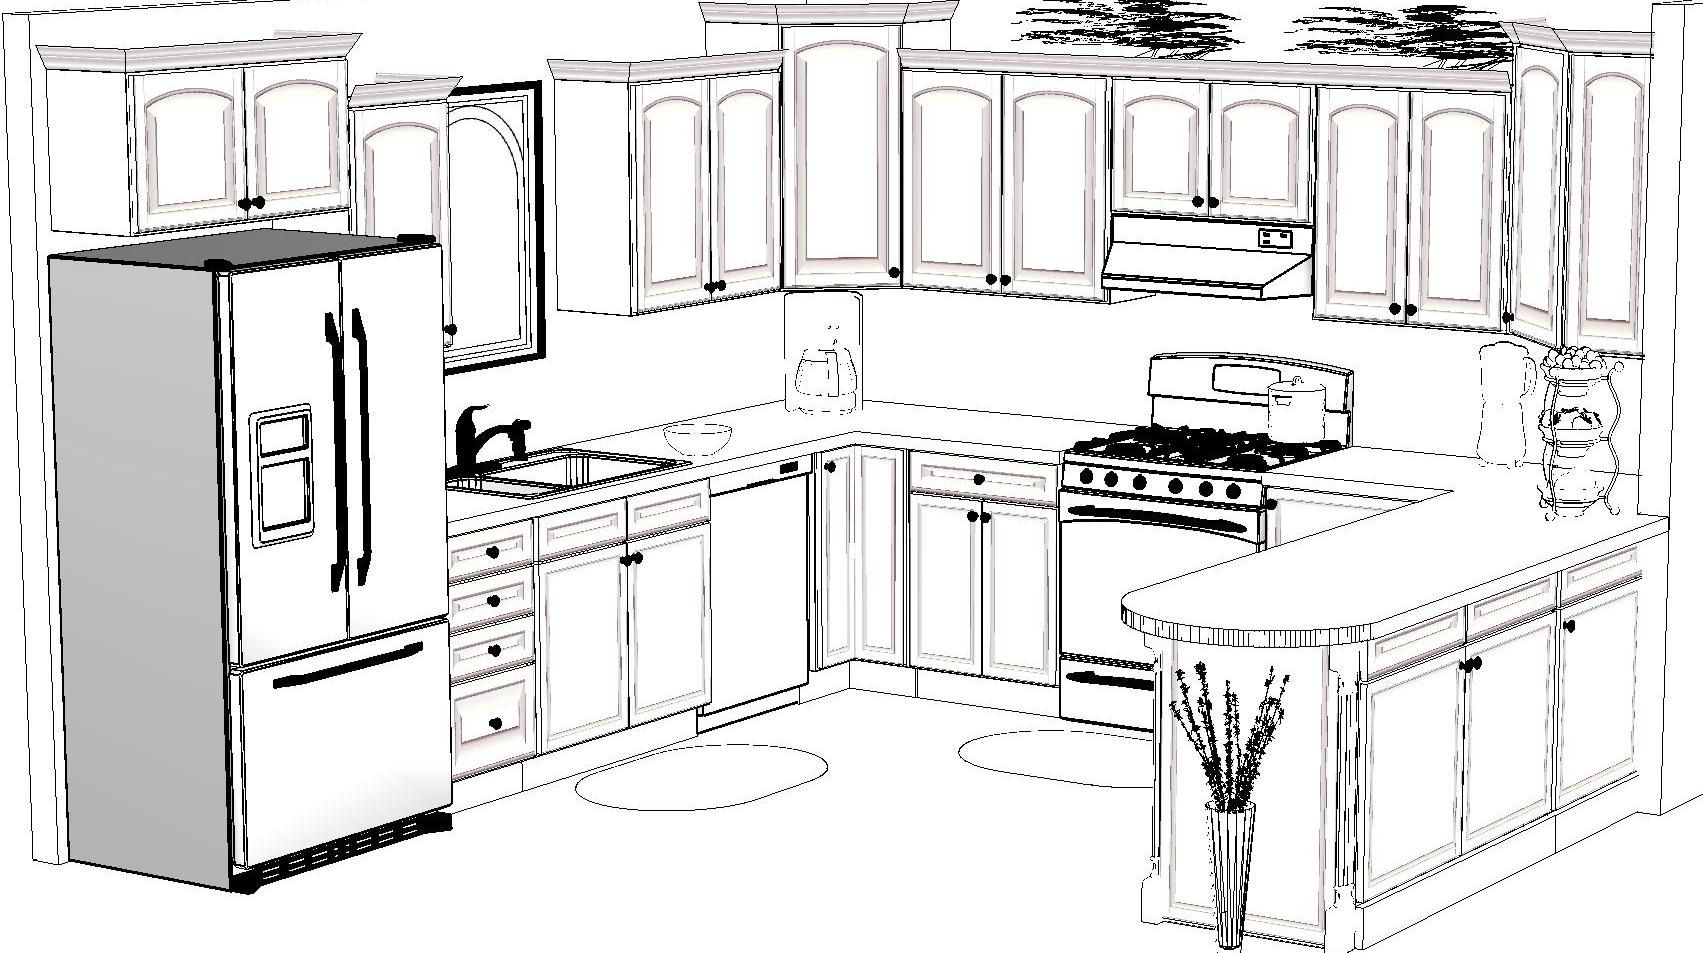 Kitchen Layout Sketch at Explore collection of